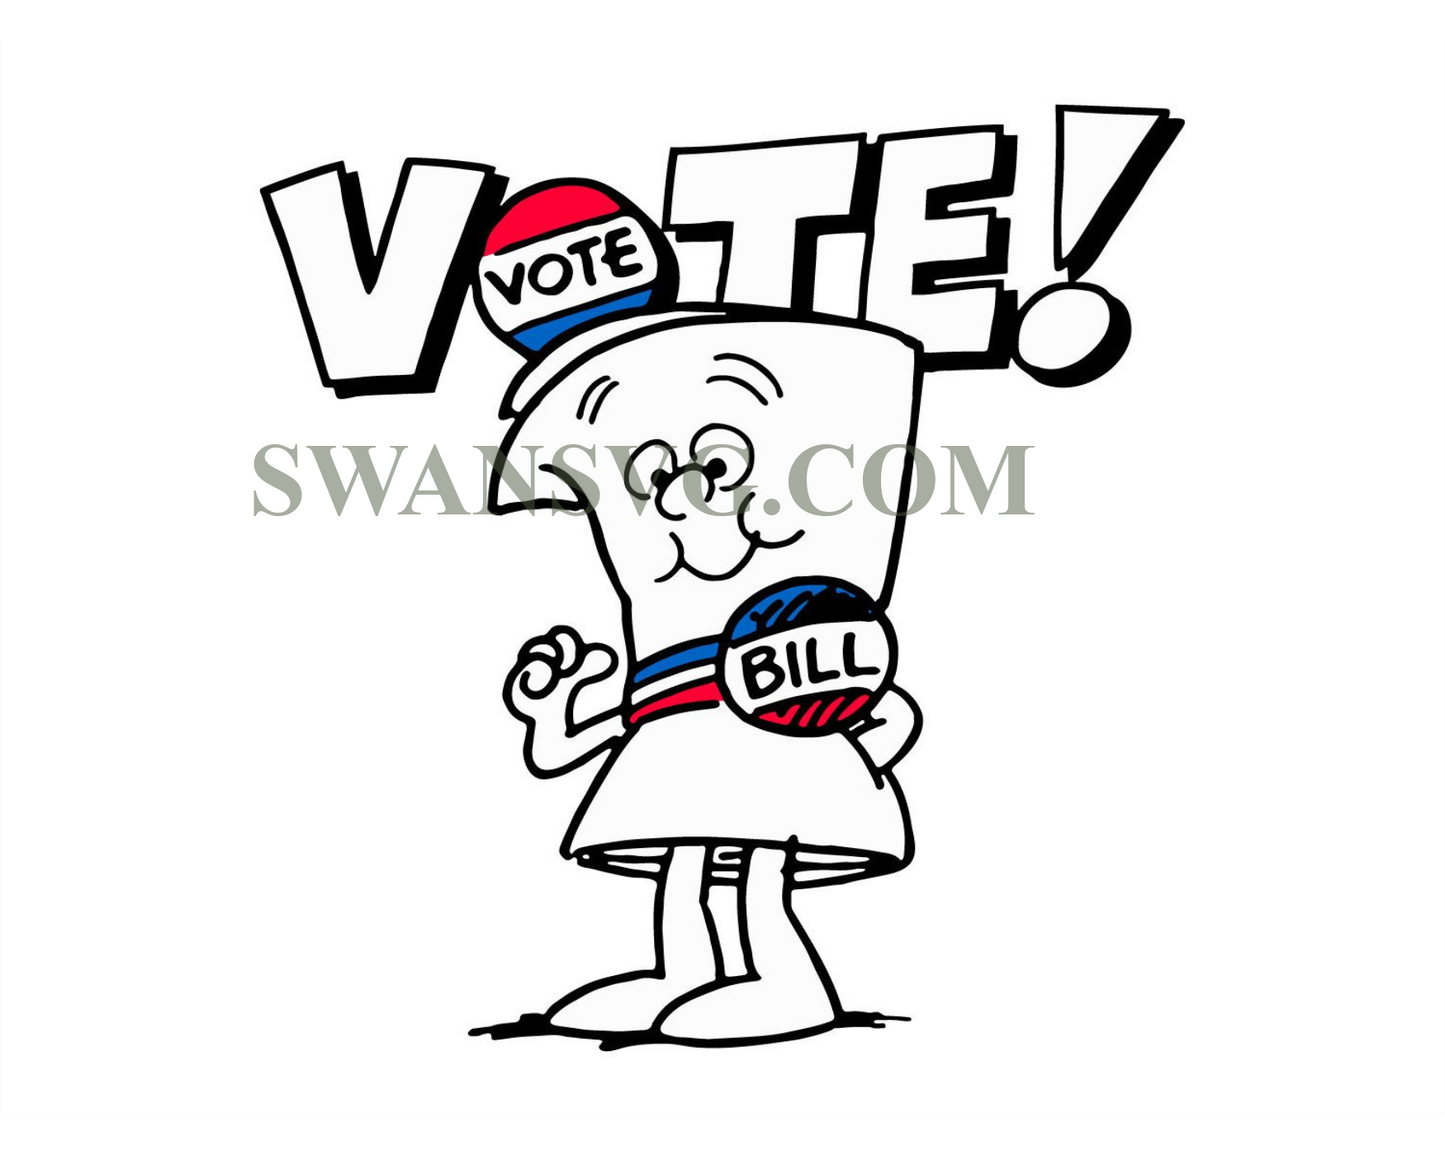 Ripple Junction Schoolhouse Rock Vote With Bill Svg